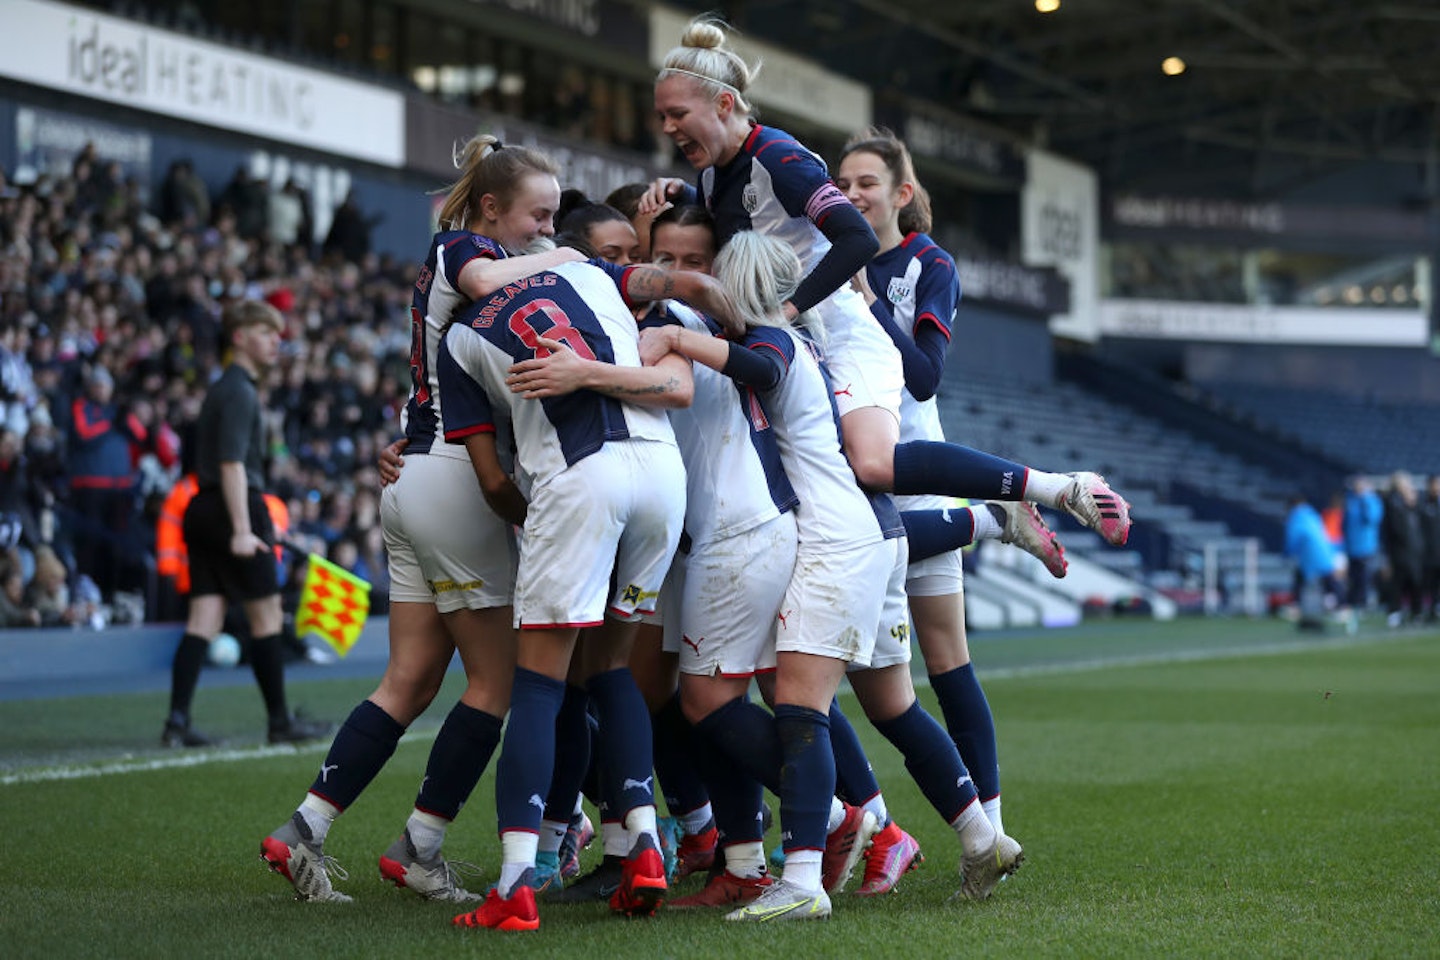 West Brom women's team switch from white shorts to navy to 'focus on  performance without added anxiety' of periods, UK News